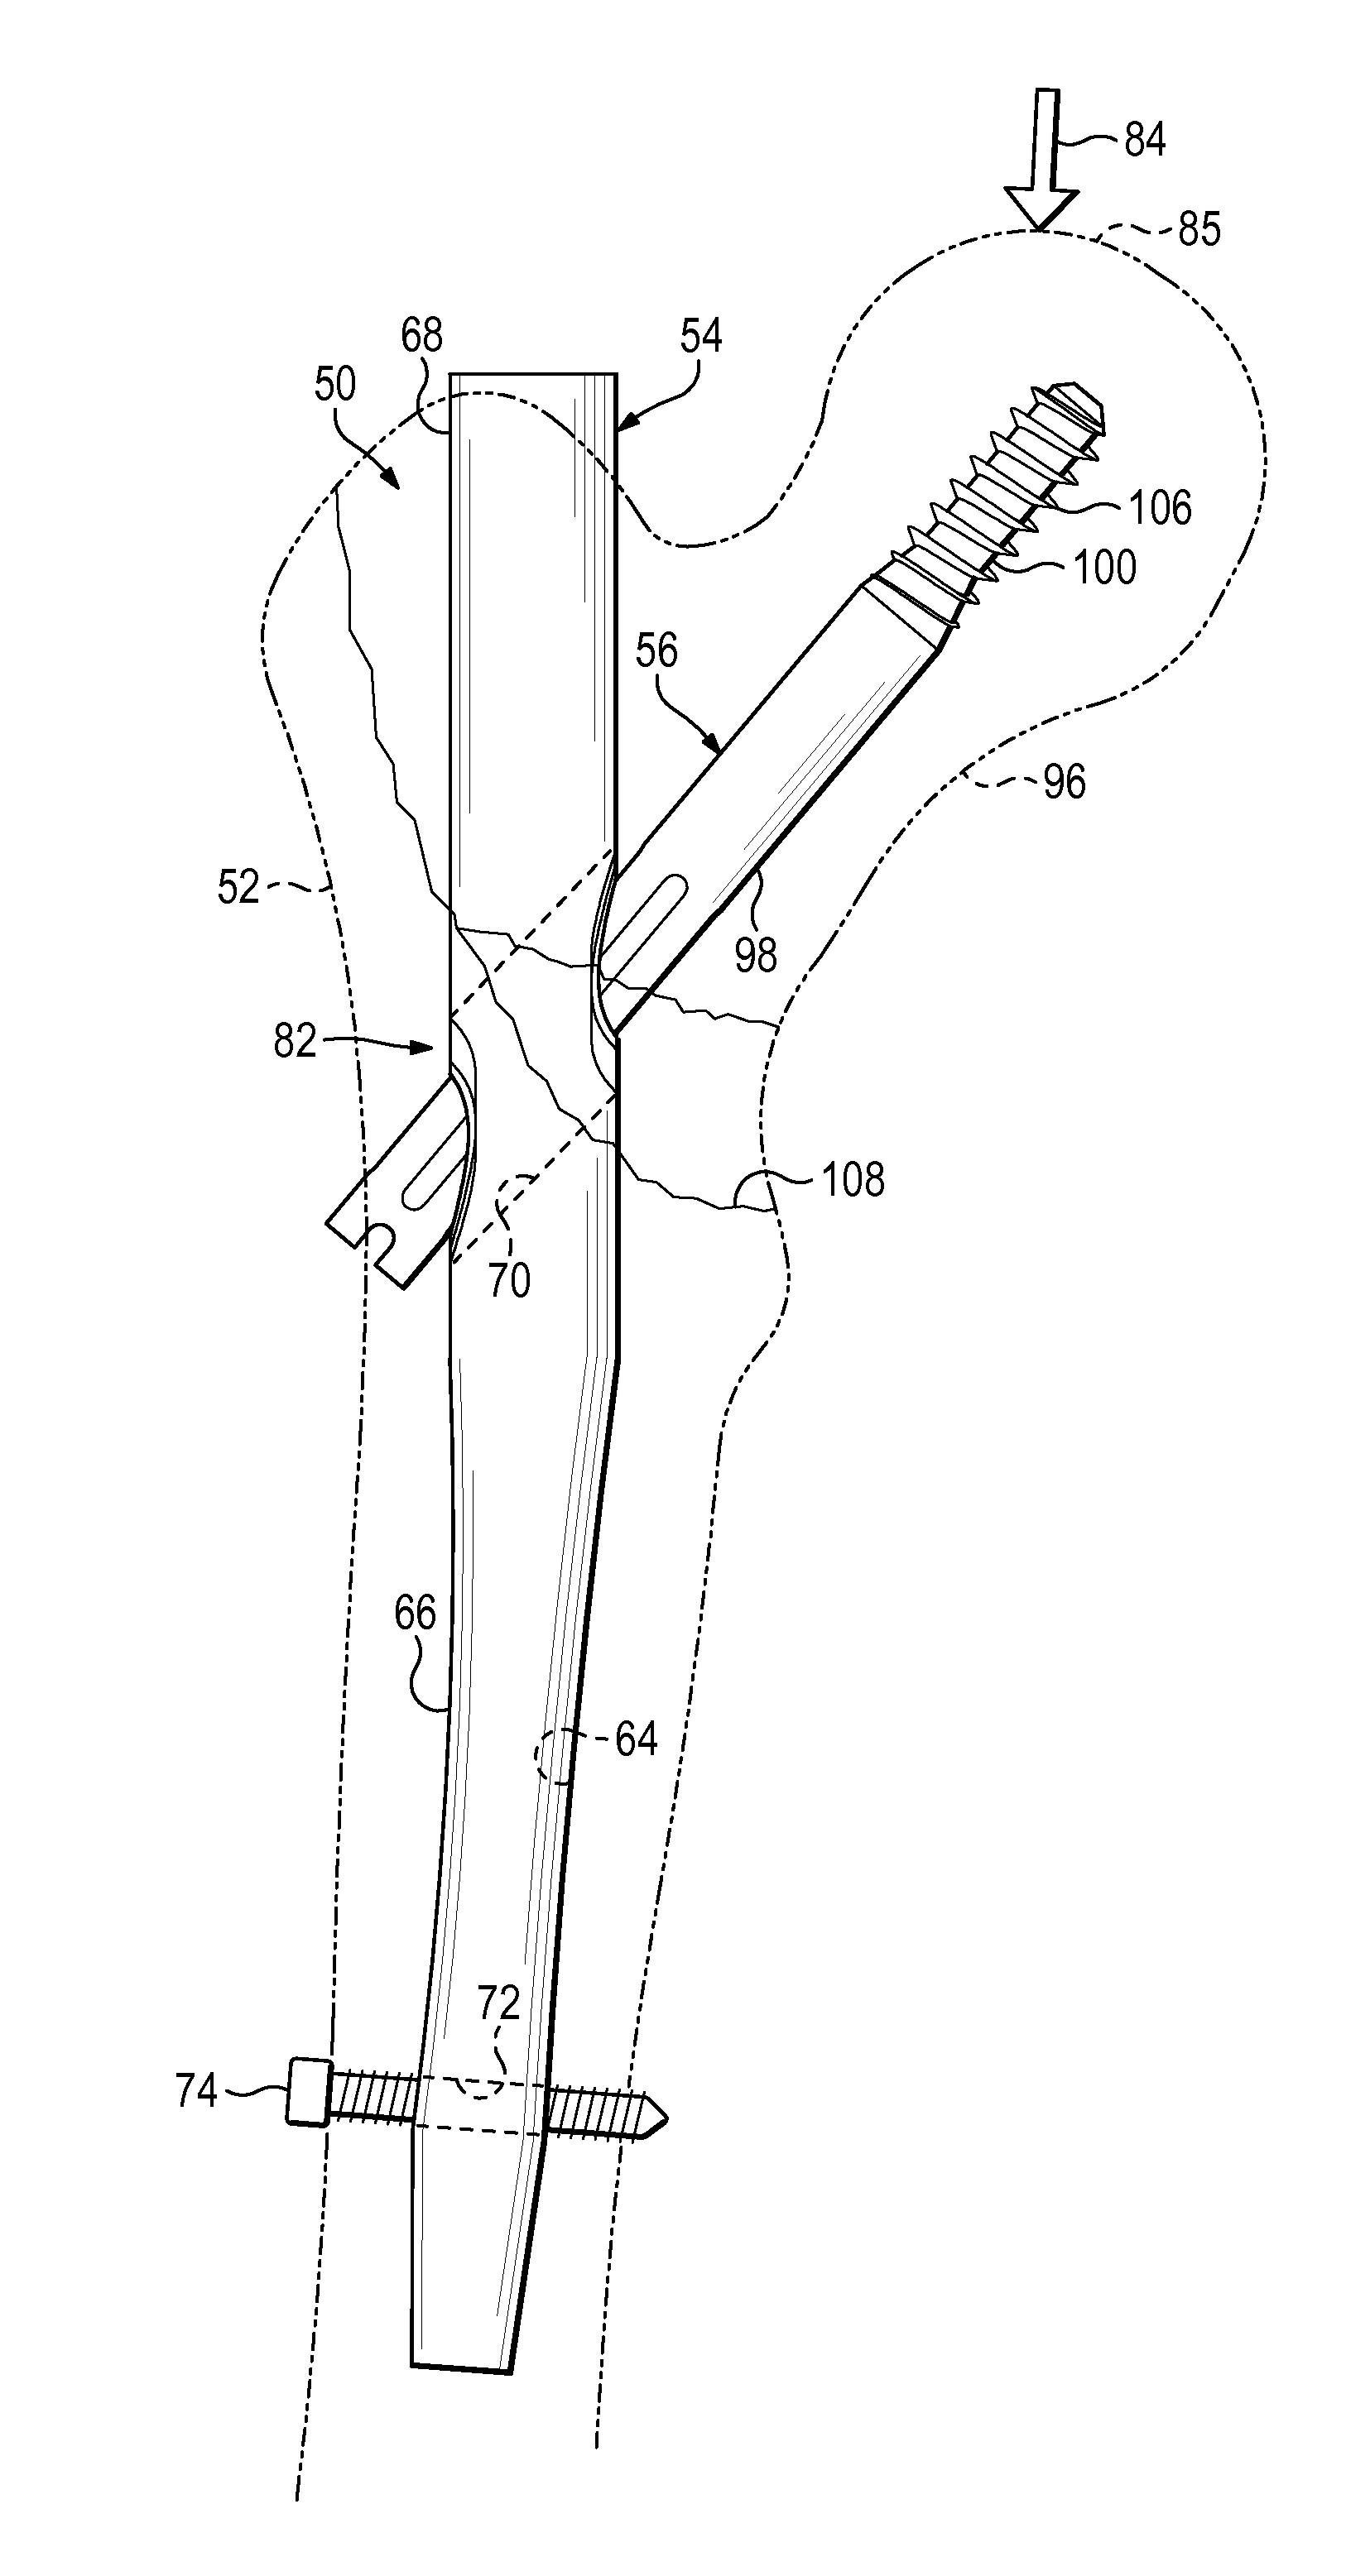 Nail-based compliant hip fixation system